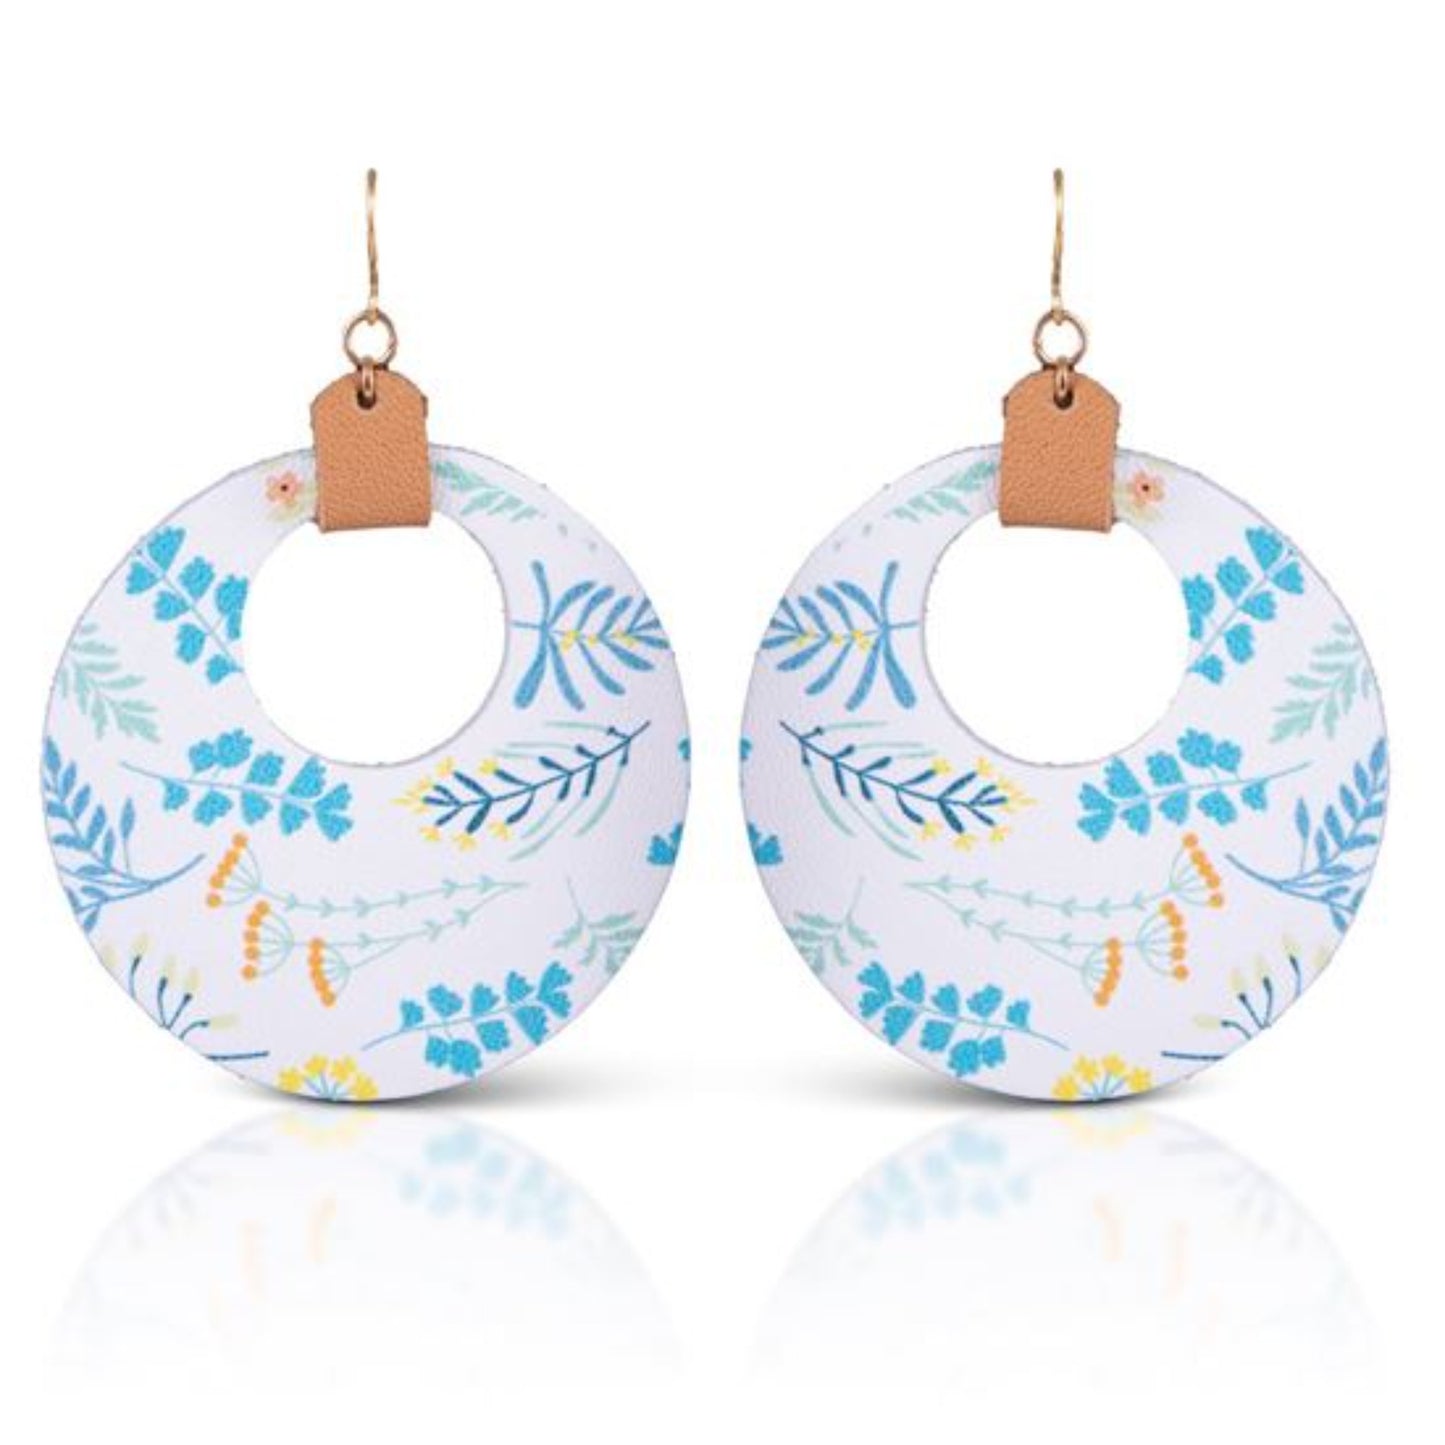 Light as a feather and pretty as Spring. You'll love the statement these lightweight leather earrings make. Surgical Steel With 18K Gold Plating. Rubber stoppers to keep them secure. White with blue, turquoise and yellow floral design. Overall approximate size: 2.75 inches long; 2 inches wide